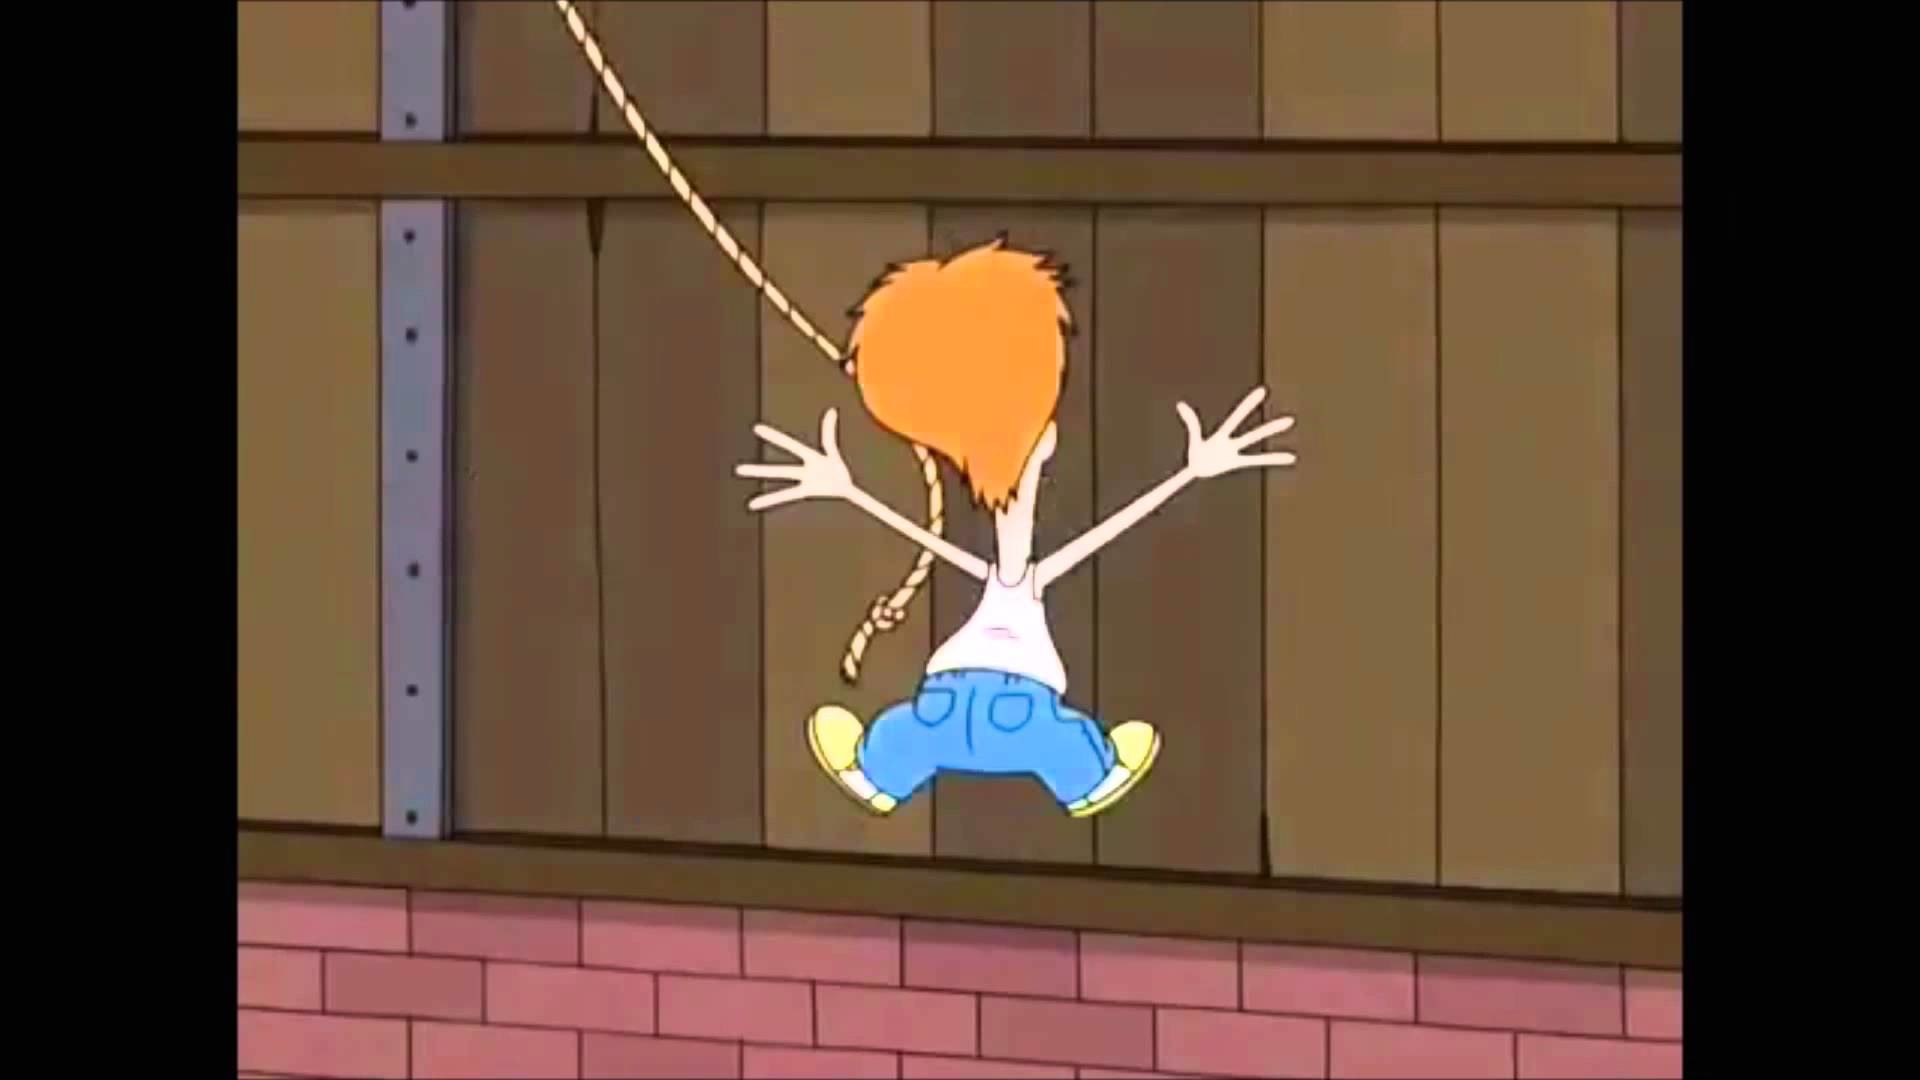 1920x1080 american dad roger dancing to OMFG hello &25 hf4hs